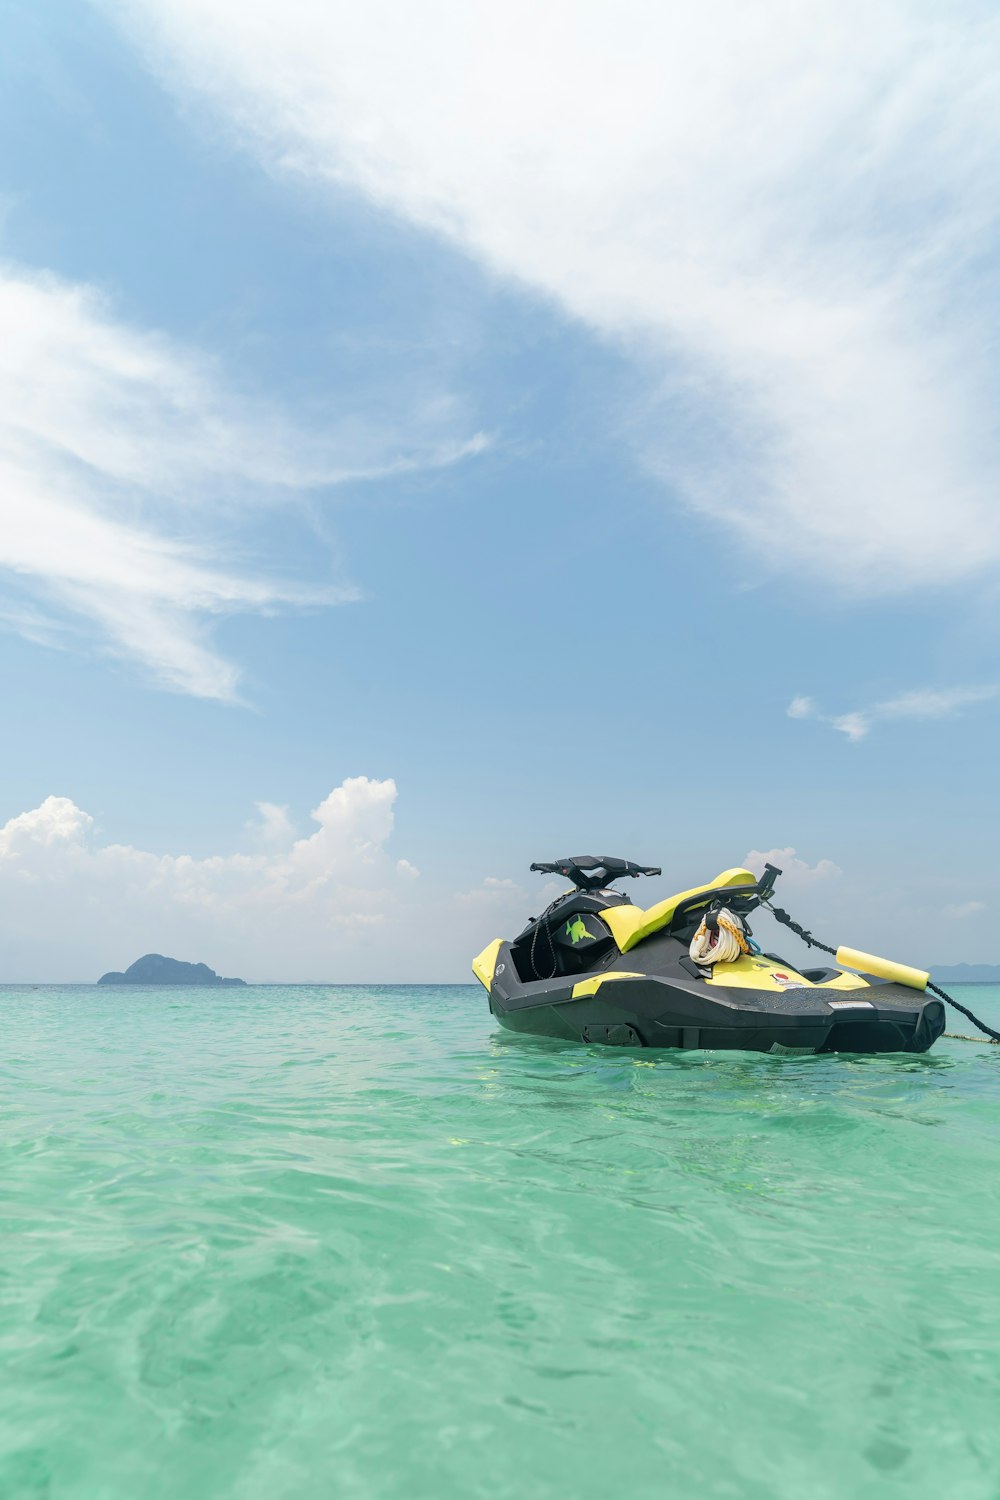 yellow and black personal watercraft on water